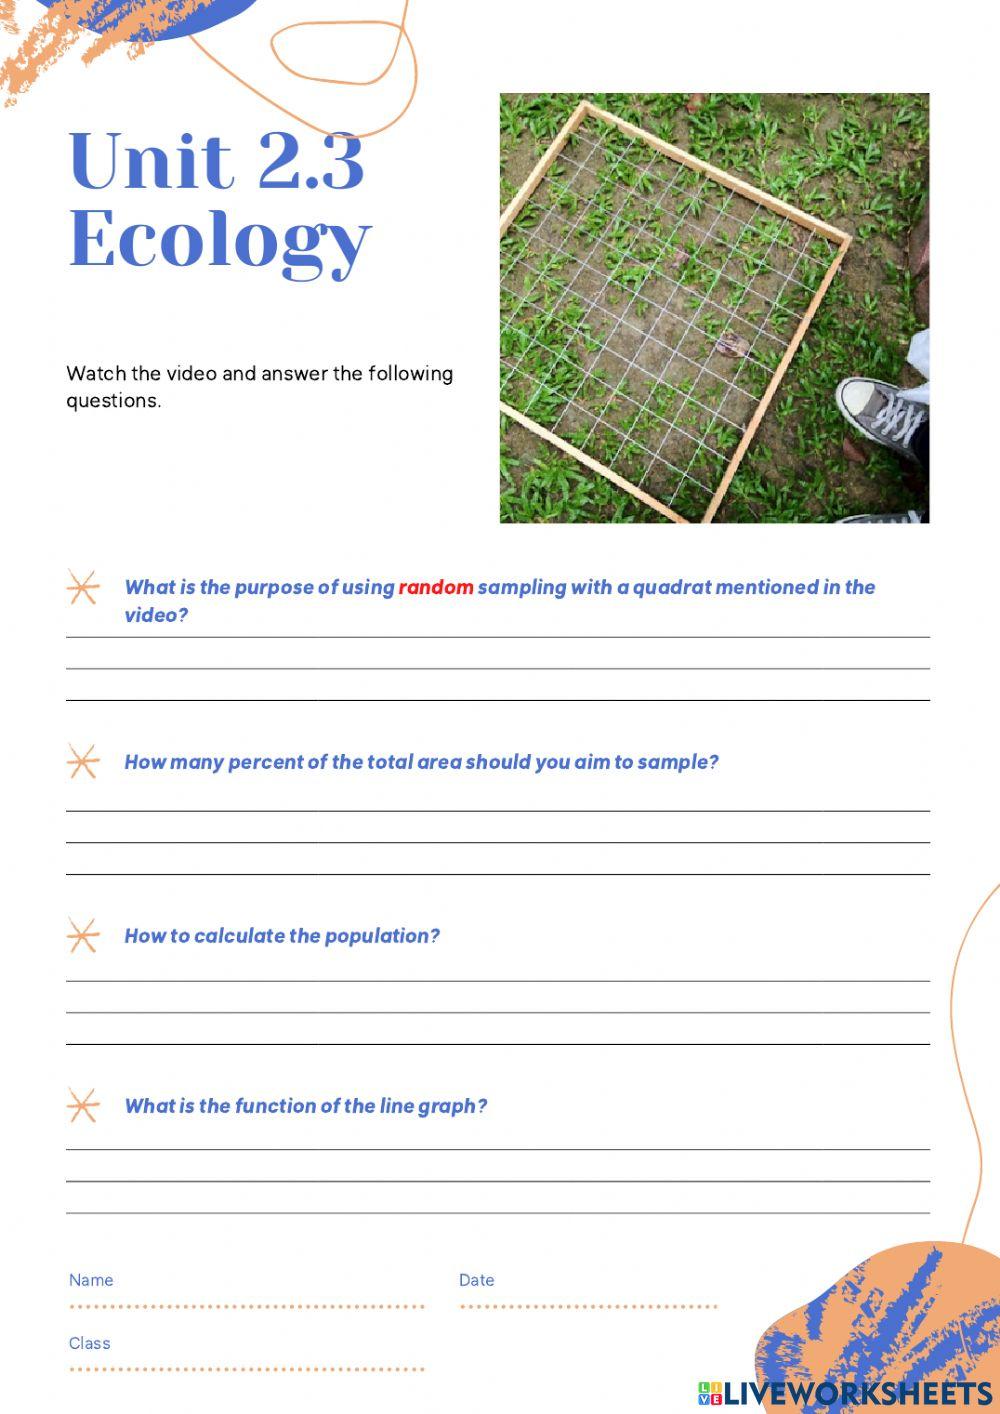 Unit 2.3 Ecology - WS for video watching activity